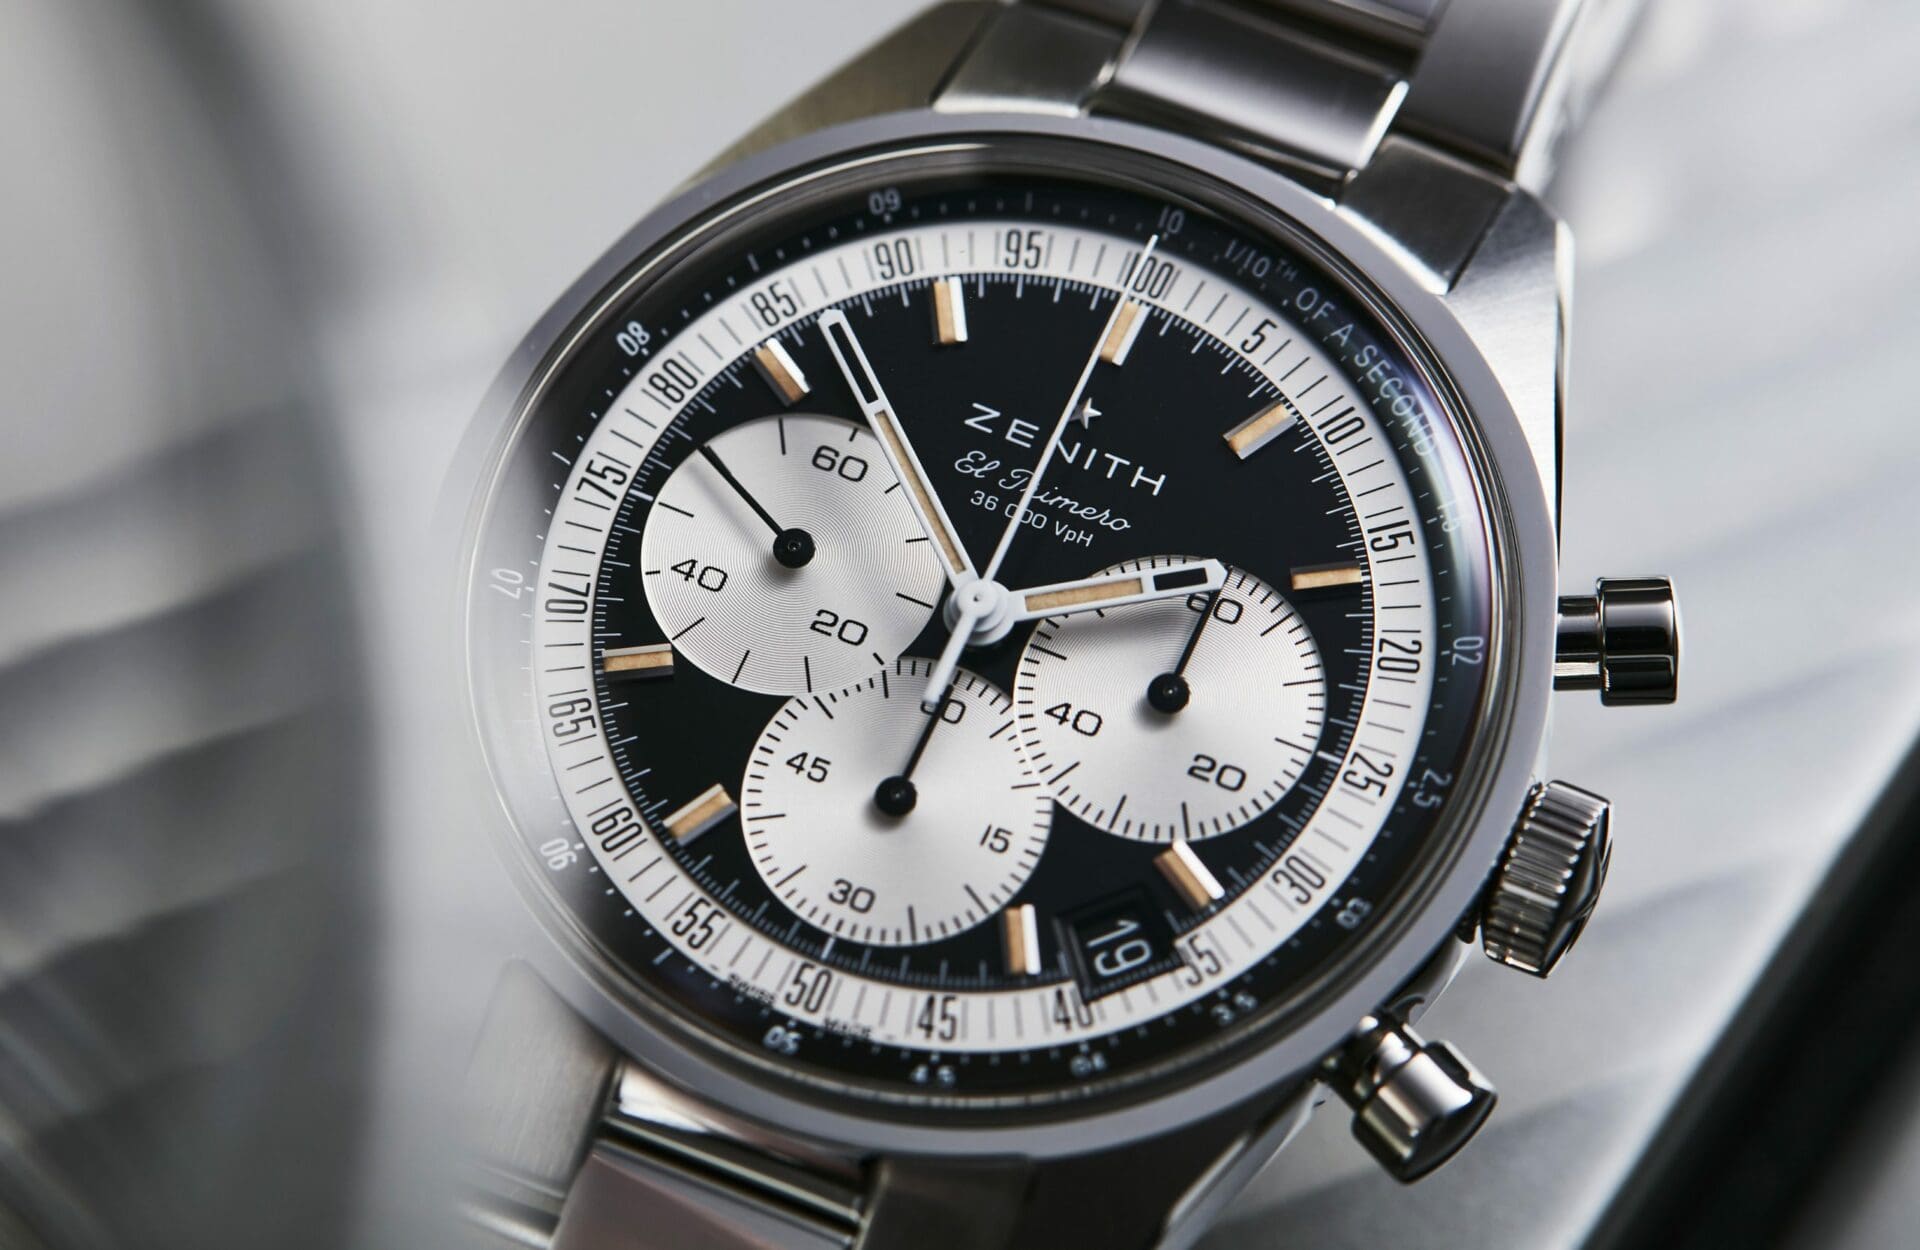 The new Zenith Chronomaster Original tastefully brings the beloved A386 up to speed